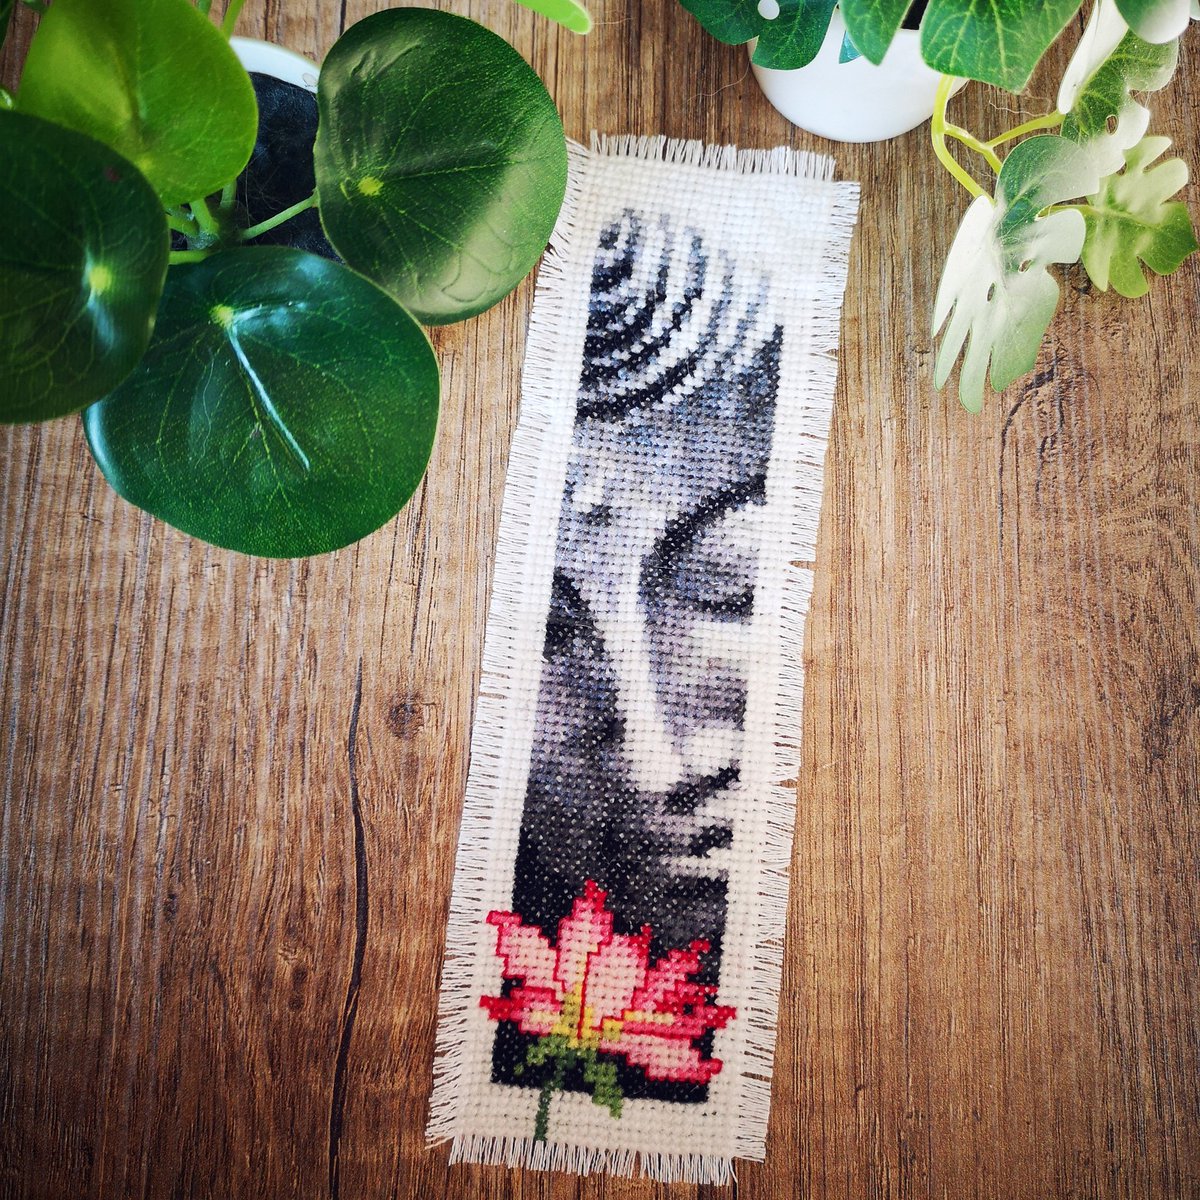 I embroidered myself a bookmark with cross stitch. 💕
It is my first attempt at embroidery.
I am very happy with the result and look forward to using the bookmark. 📕

#crossstich #crossstiching #embroidery #yarn #yarnaddict #yarnlove #handmade #handmadewithlove #handcrafted #diy